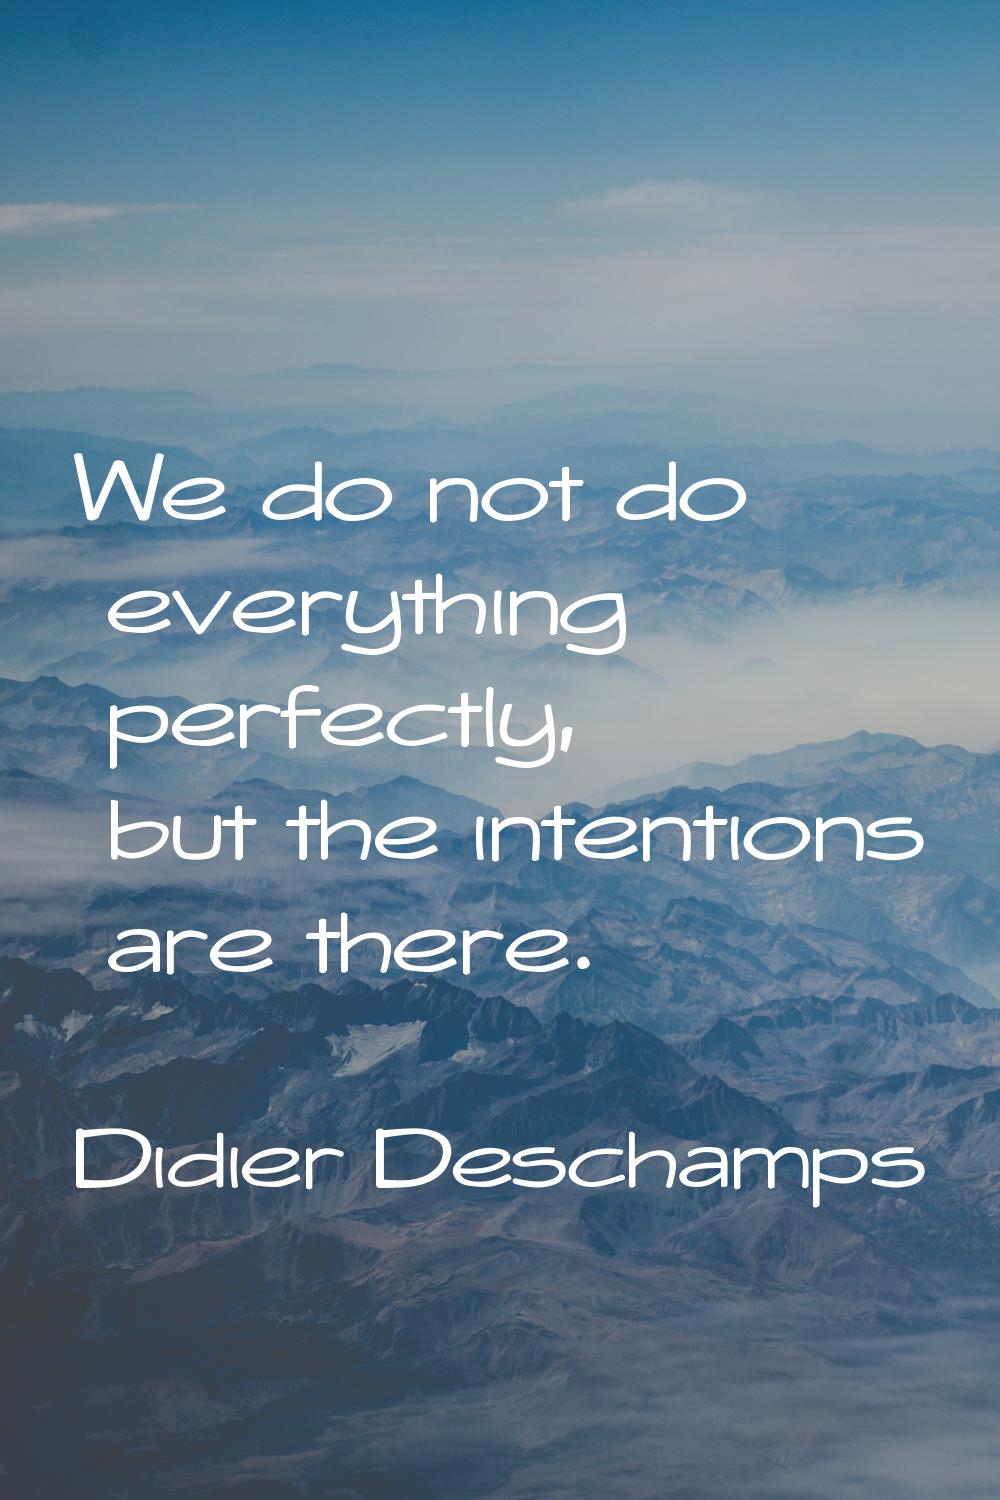 We do not do everything perfectly, but the intentions are there.